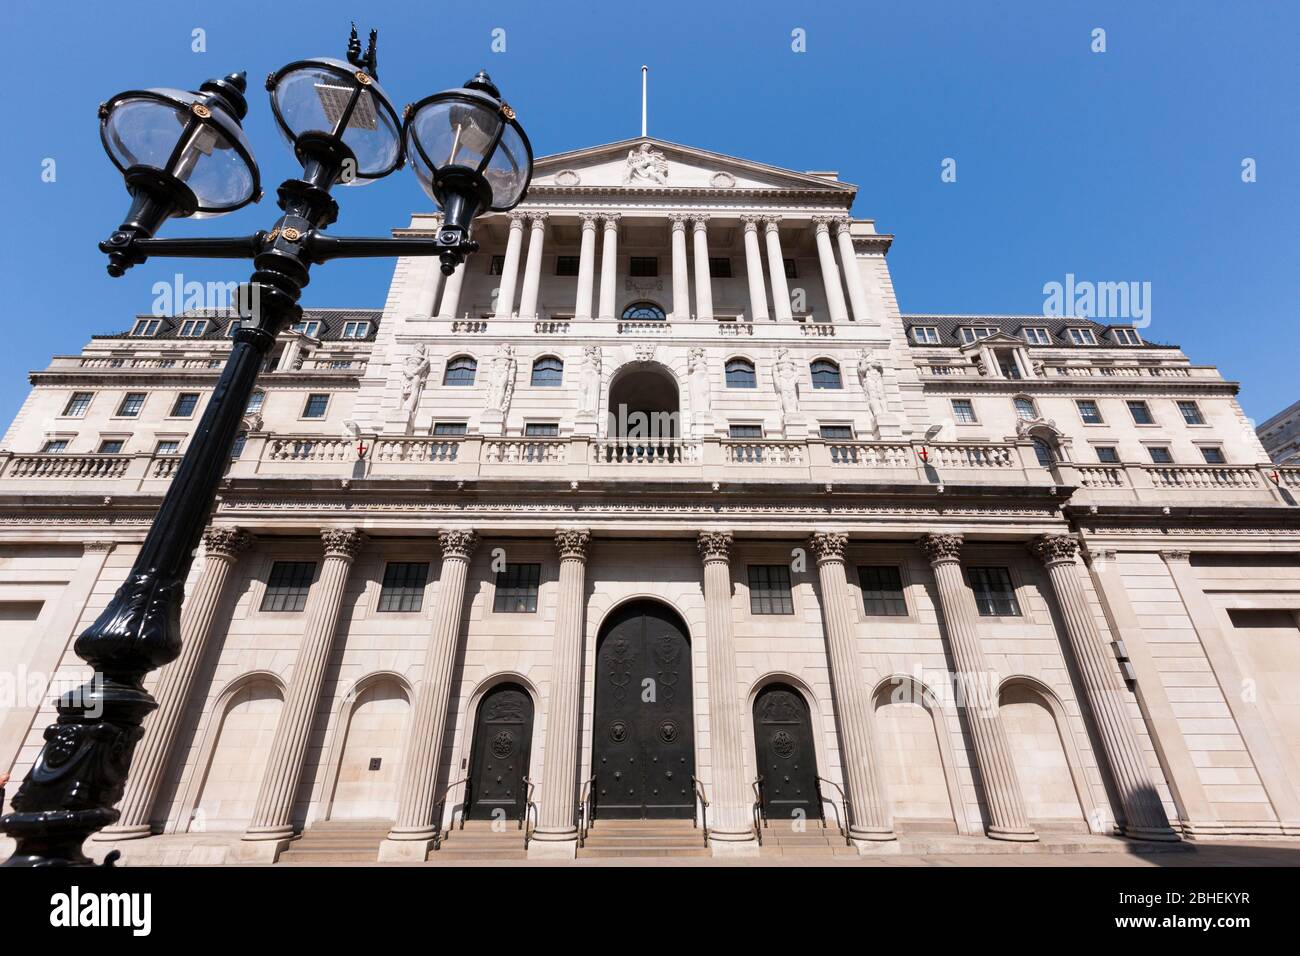 Front facade of the Bank of England building on Threadneedle St, London, EC2R 8AH. The bank controls interest rates for the UK. (118) Stock Photo